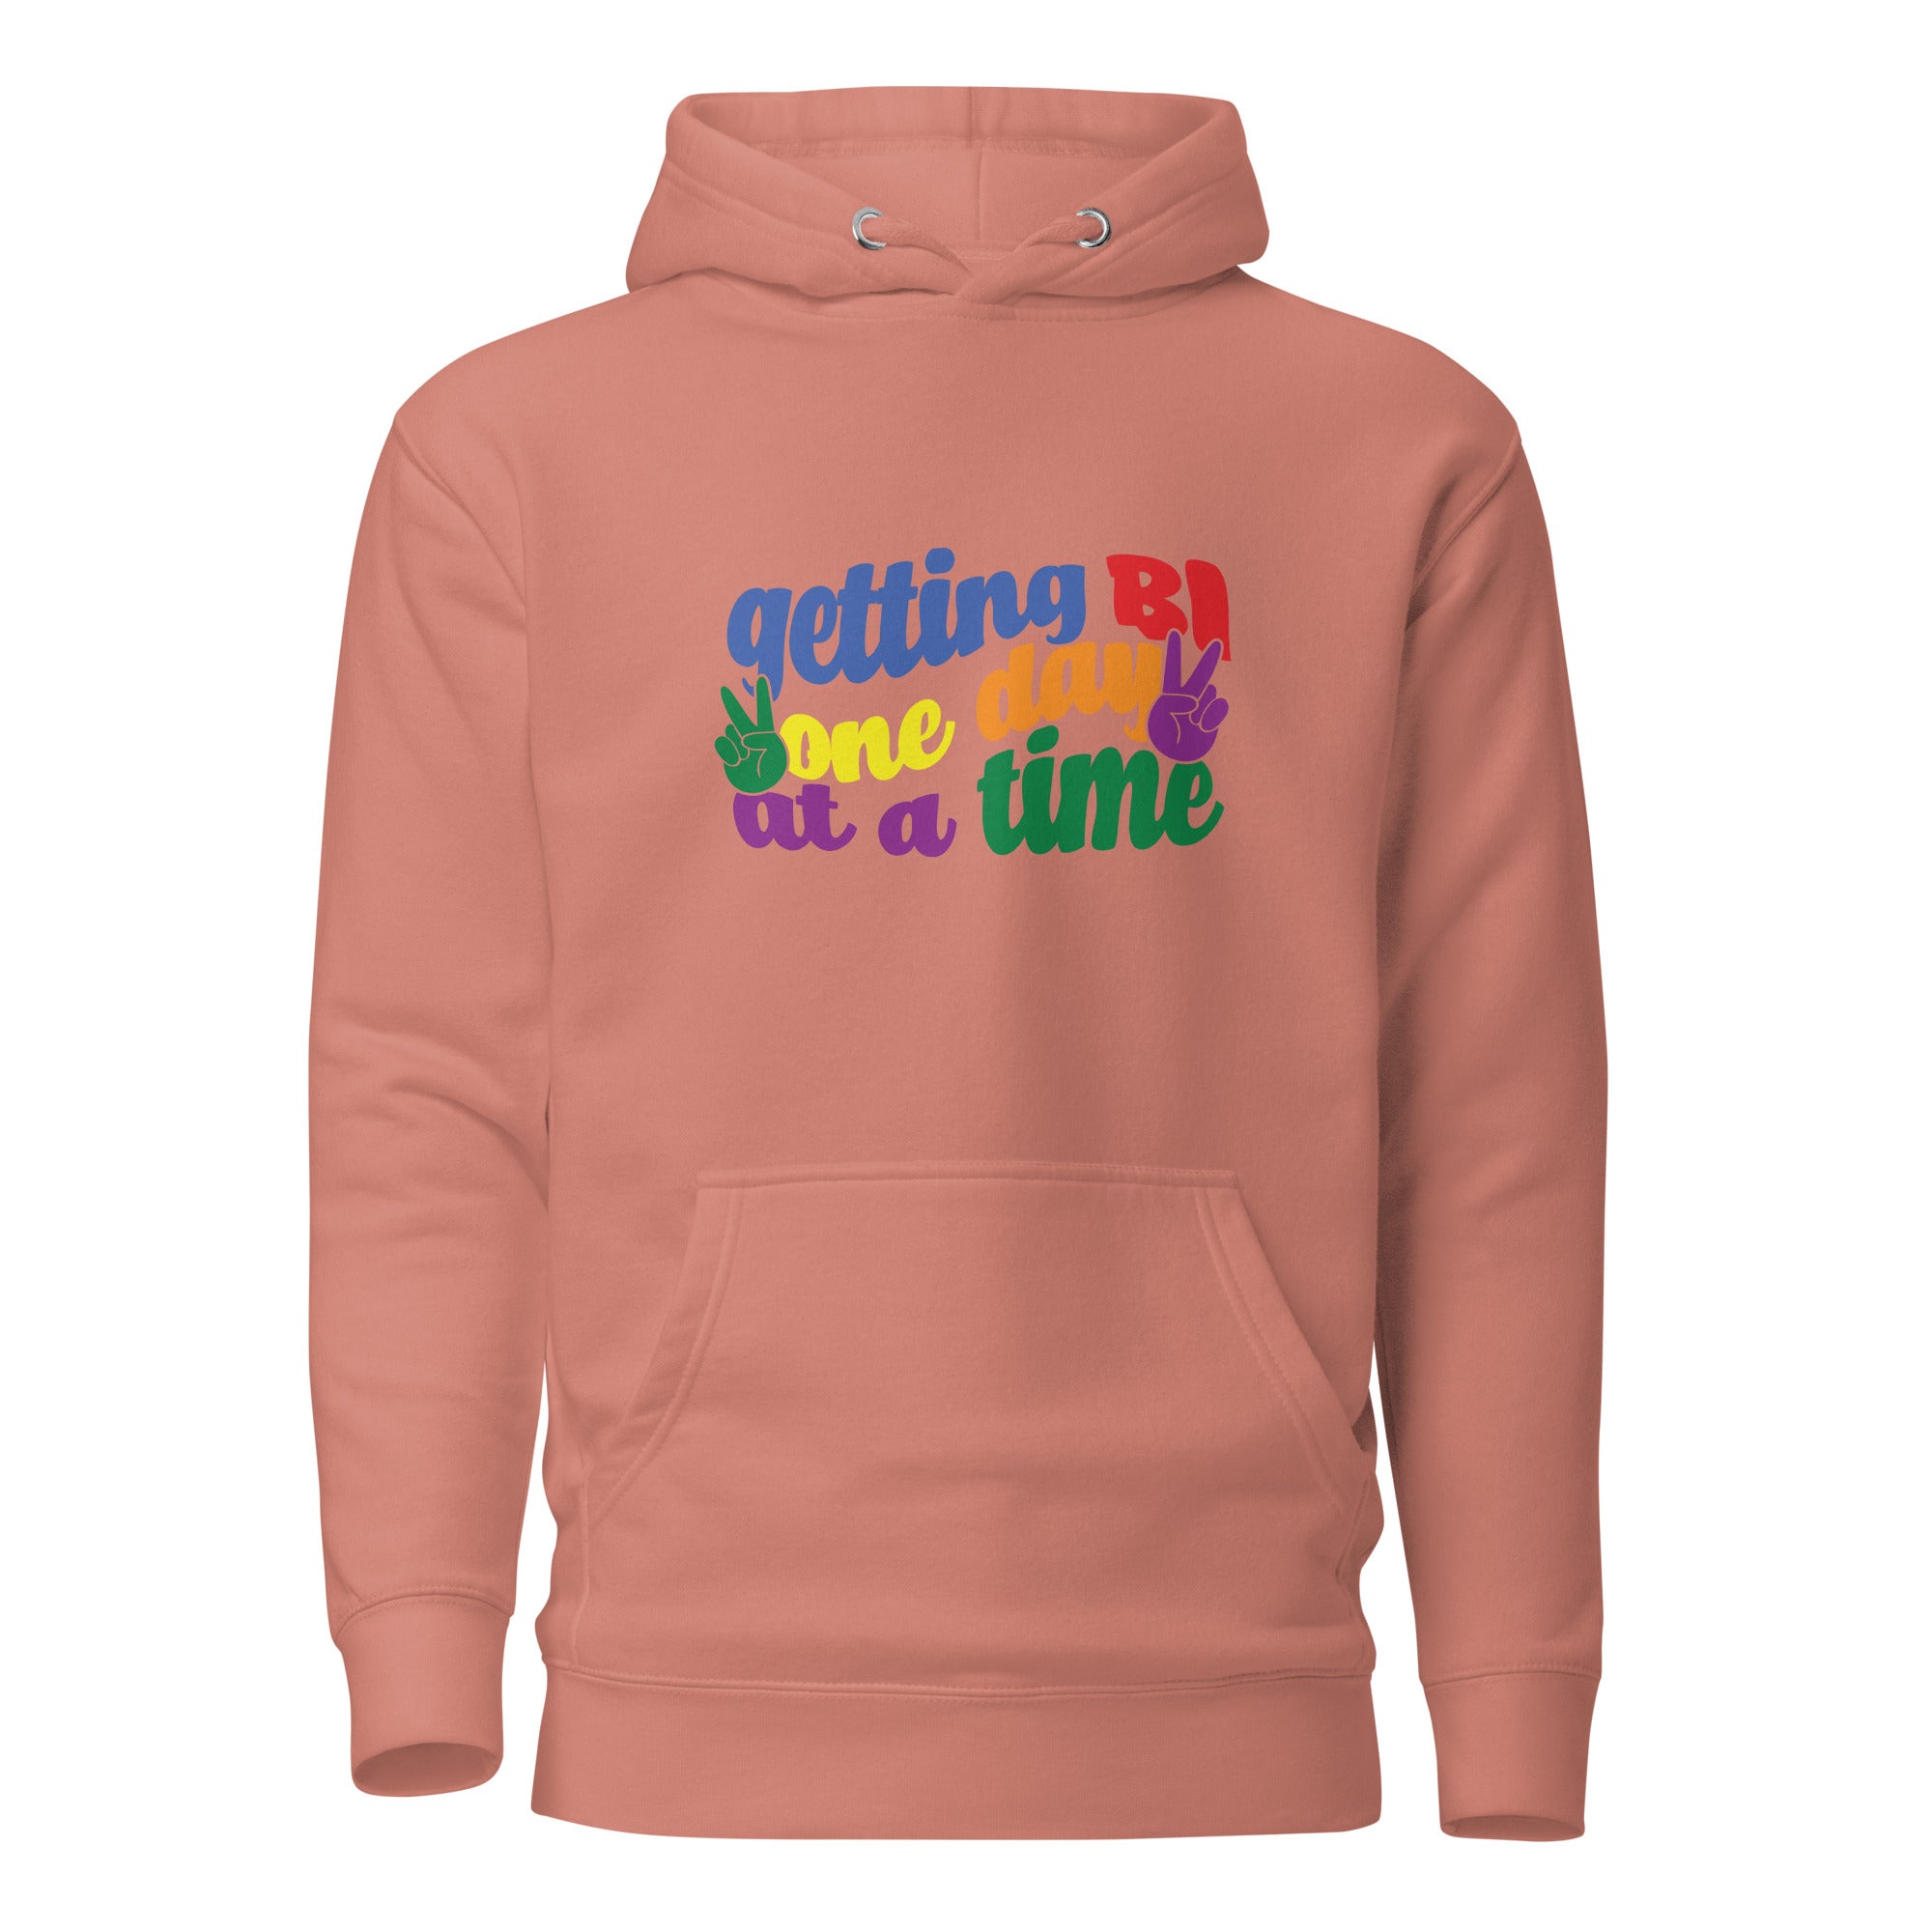 Unisex Hoodie- Getting Bi one day at a time